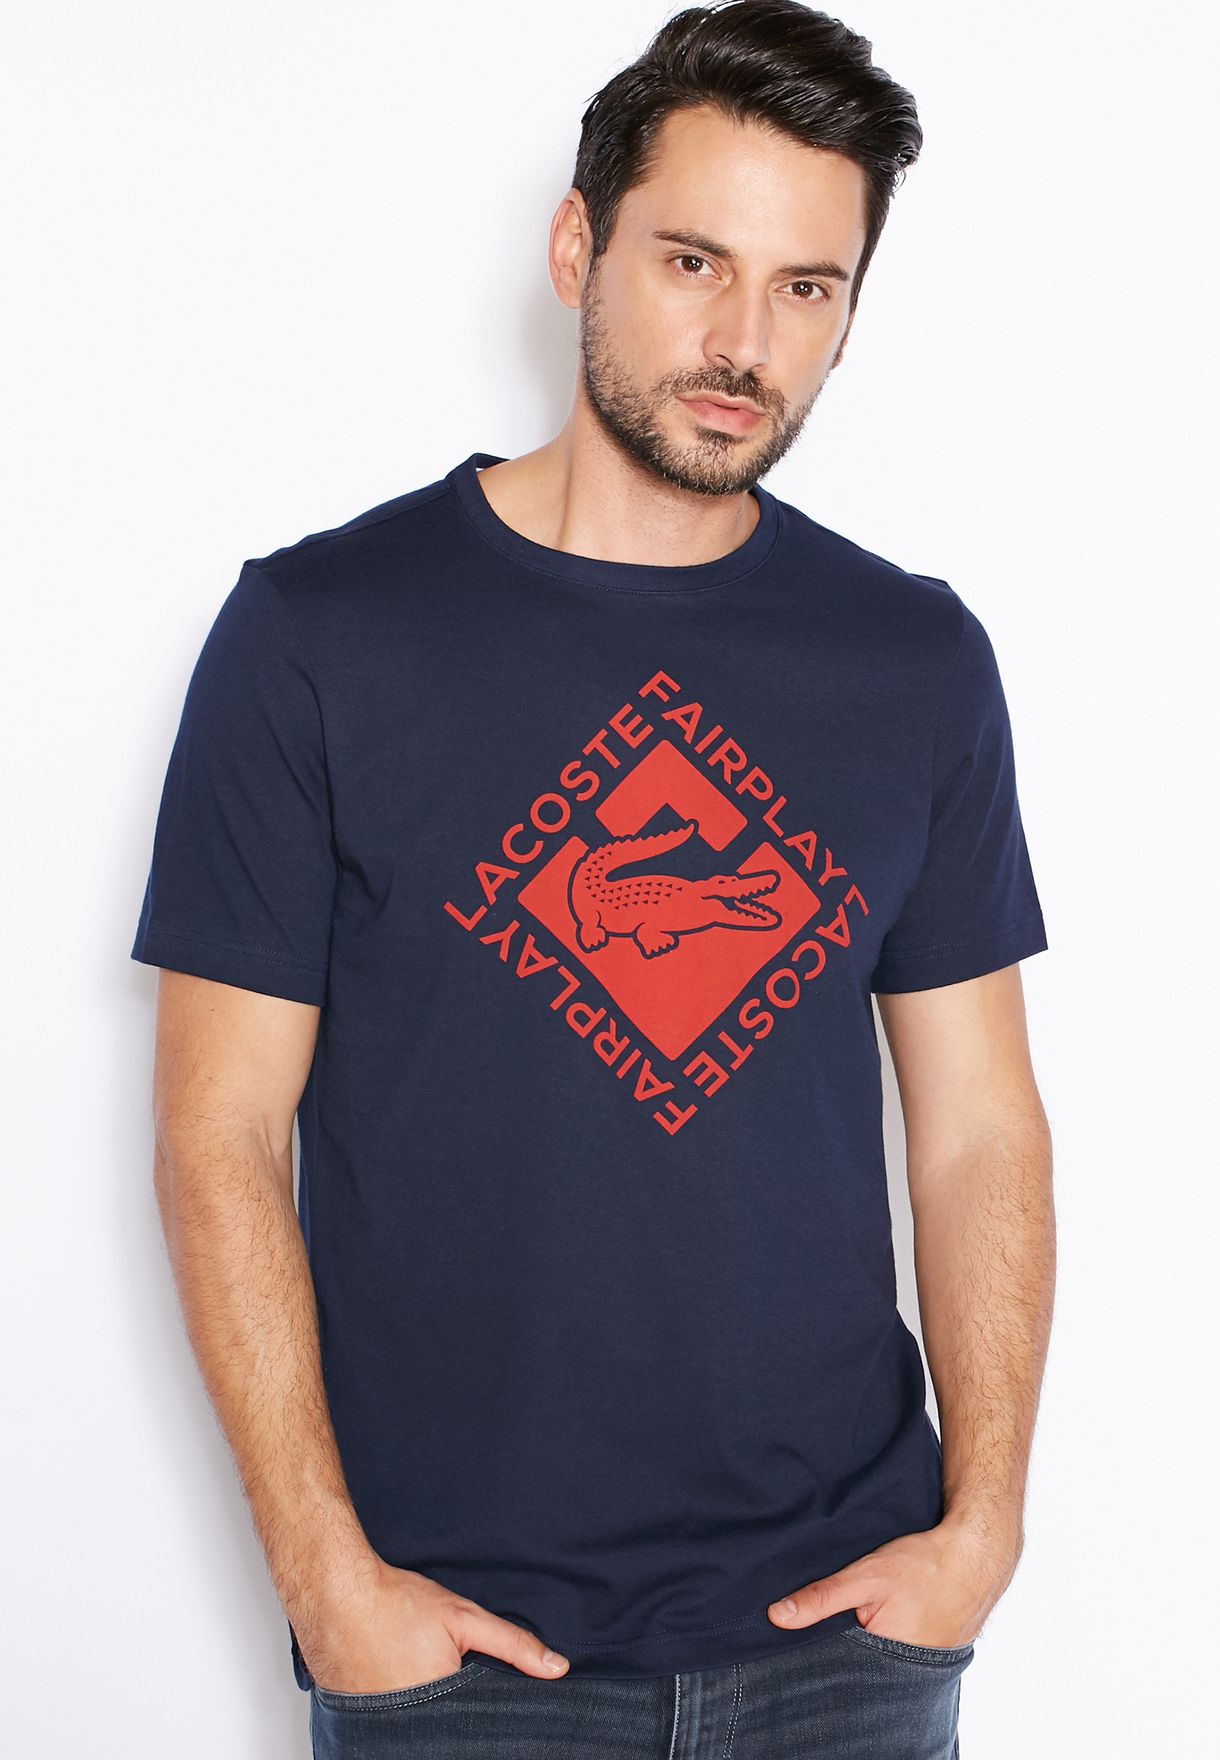 lacoste fairplay t shirt